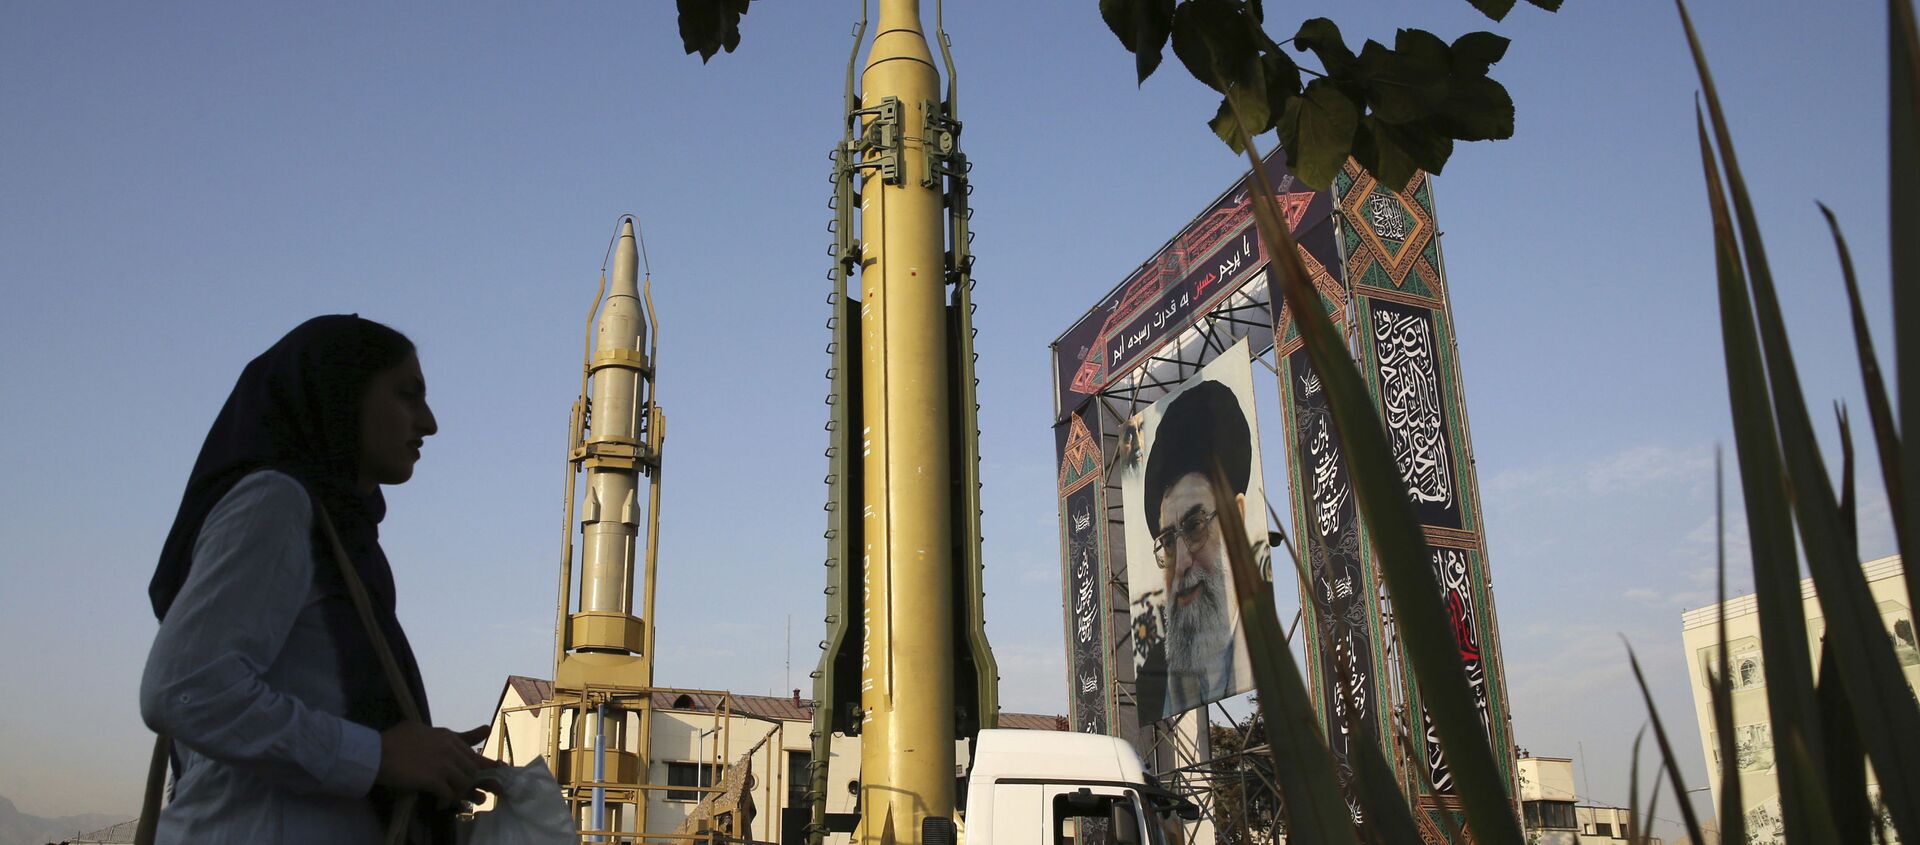 In this Sept. 24, 2017 file photo, surface-to-surface missiles and a portrait of the Iranian Supreme Leader Ayatollah Ali Khamenei are displayed by the Revolutionary Guard in an exhibition marking the anniversary of outset of the 1980s Iran-Iraq war, at Baharestan Square in Tehran, Iran. - Sputnik International, 1920